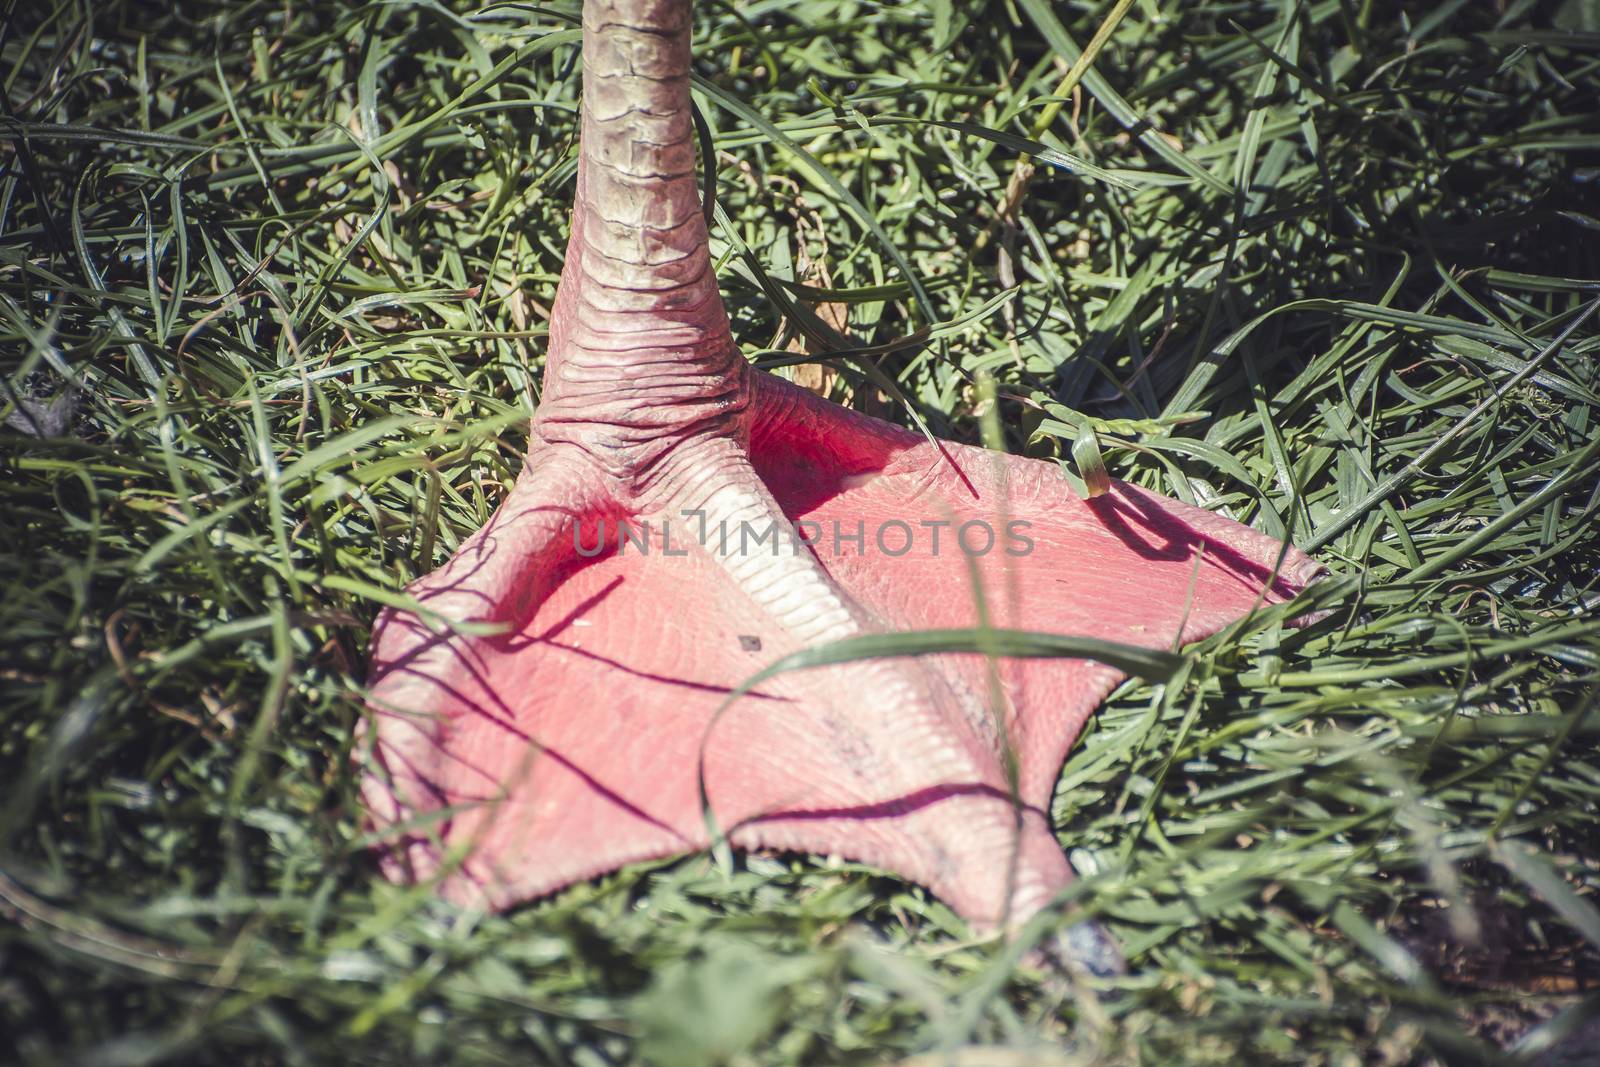 detail flamingo leg resting on the grass by FernandoCortes